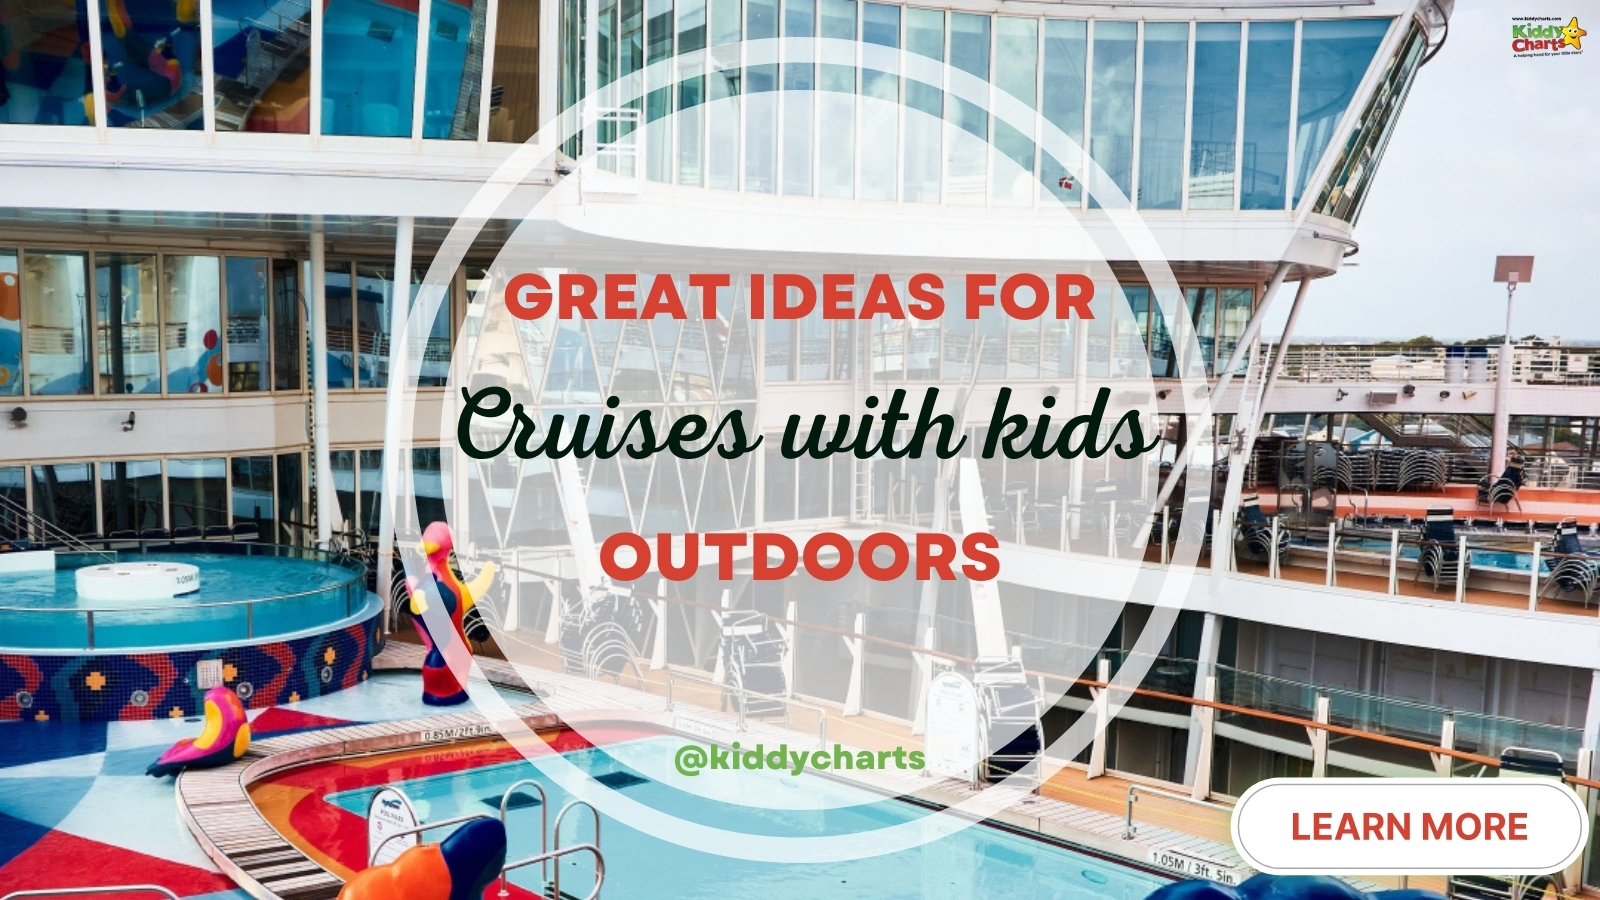 Fun in the sun: Best outdoor activities for cruises with kids